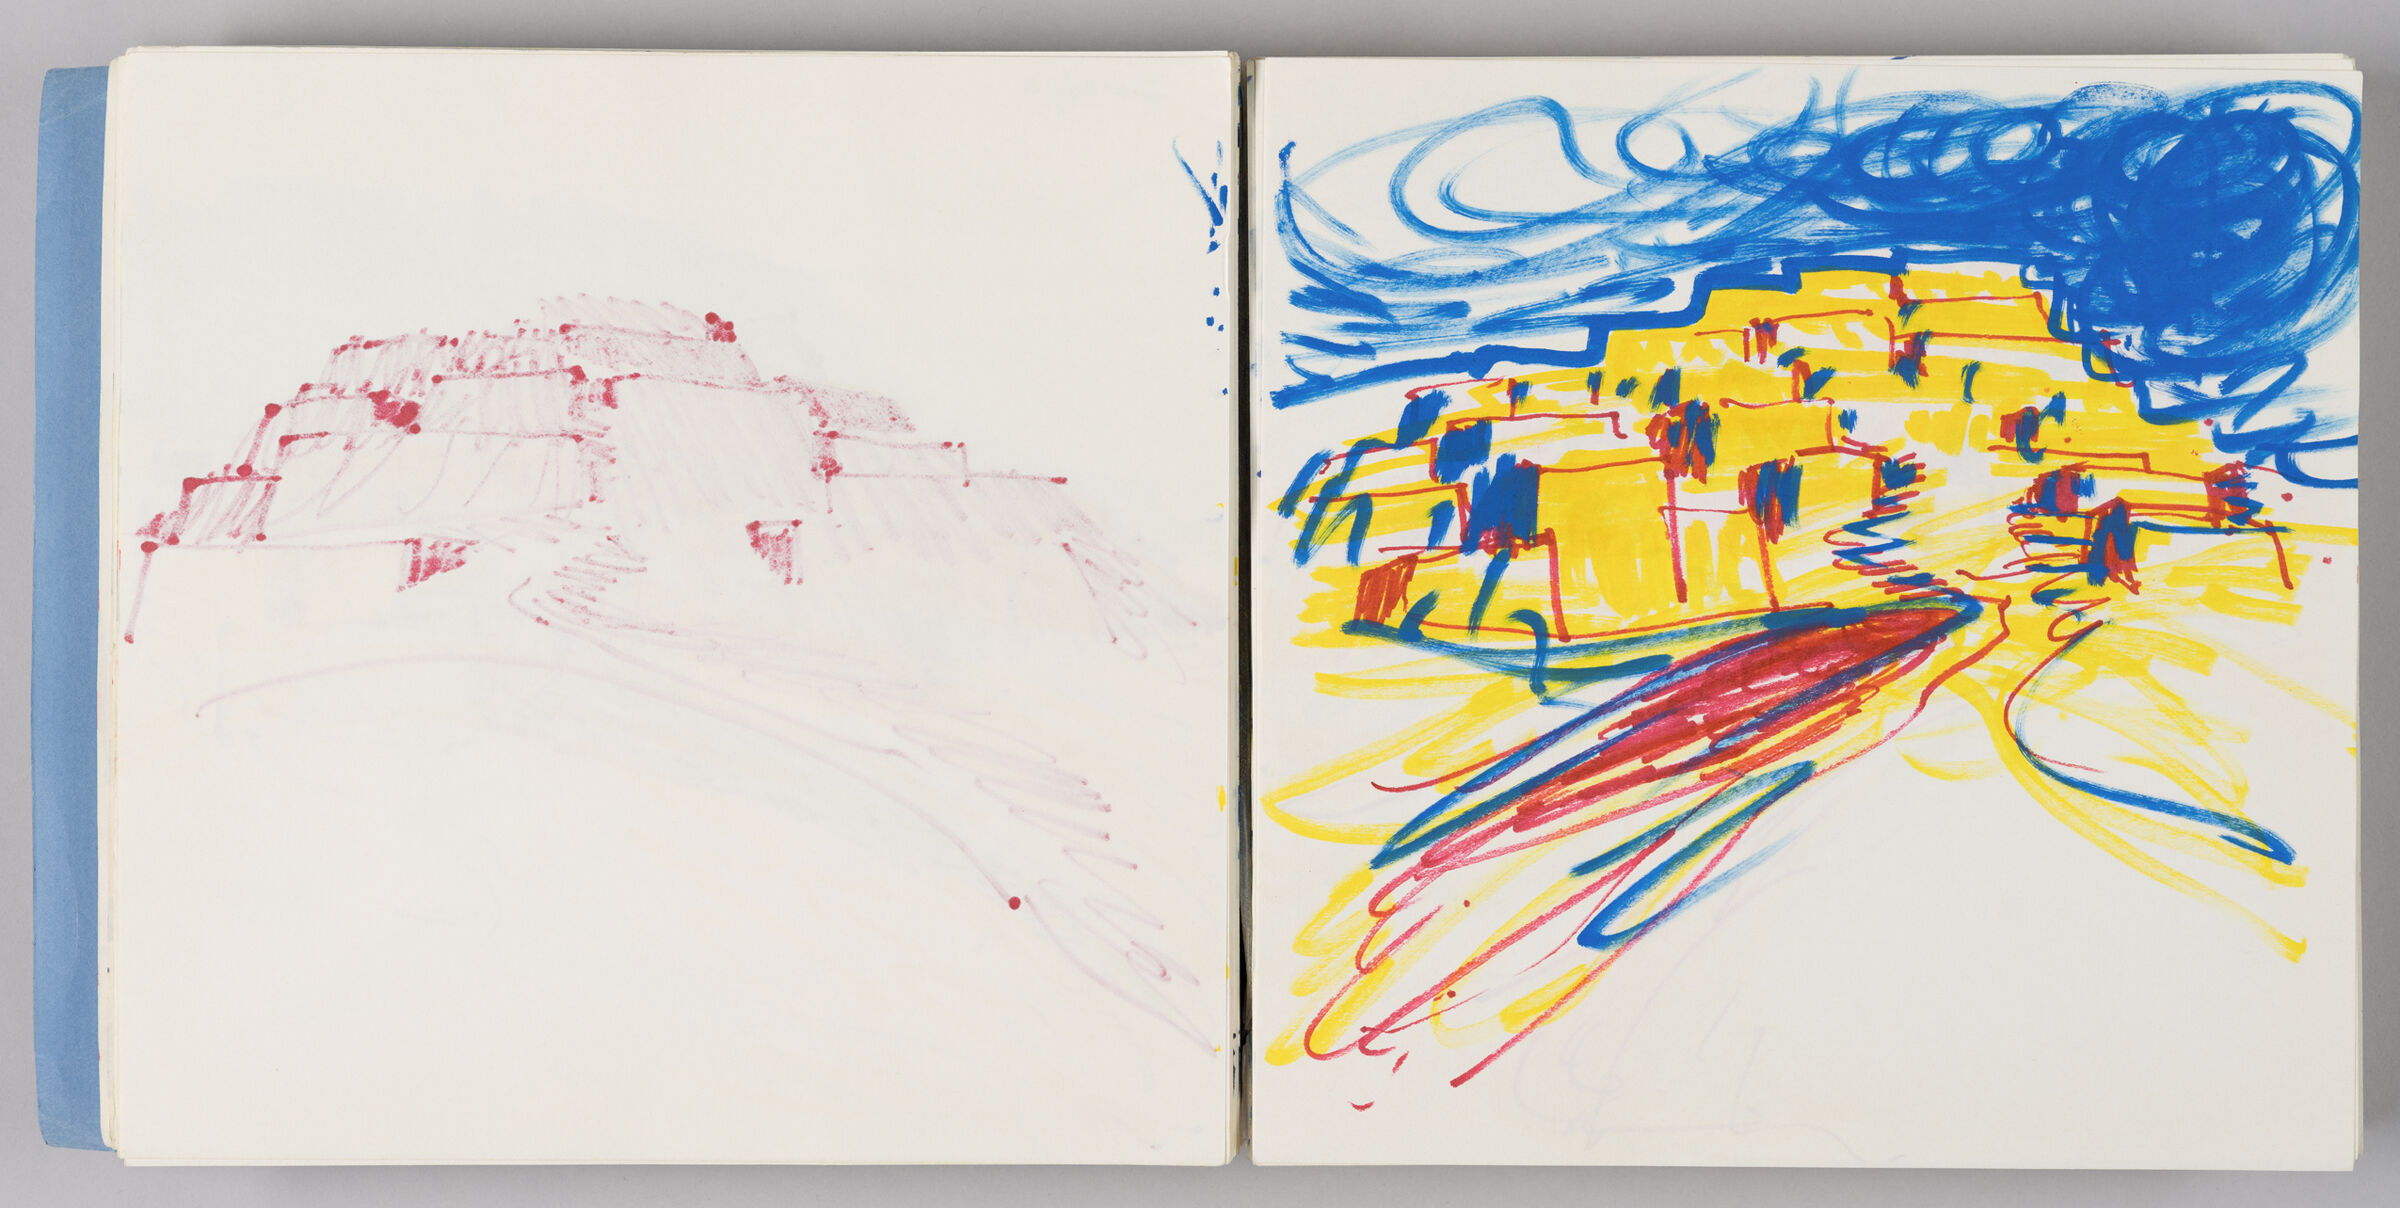 Untitled (Bleed-Through Of Previous Page, Left Page); Untitled (View Of Freija, Right Page)